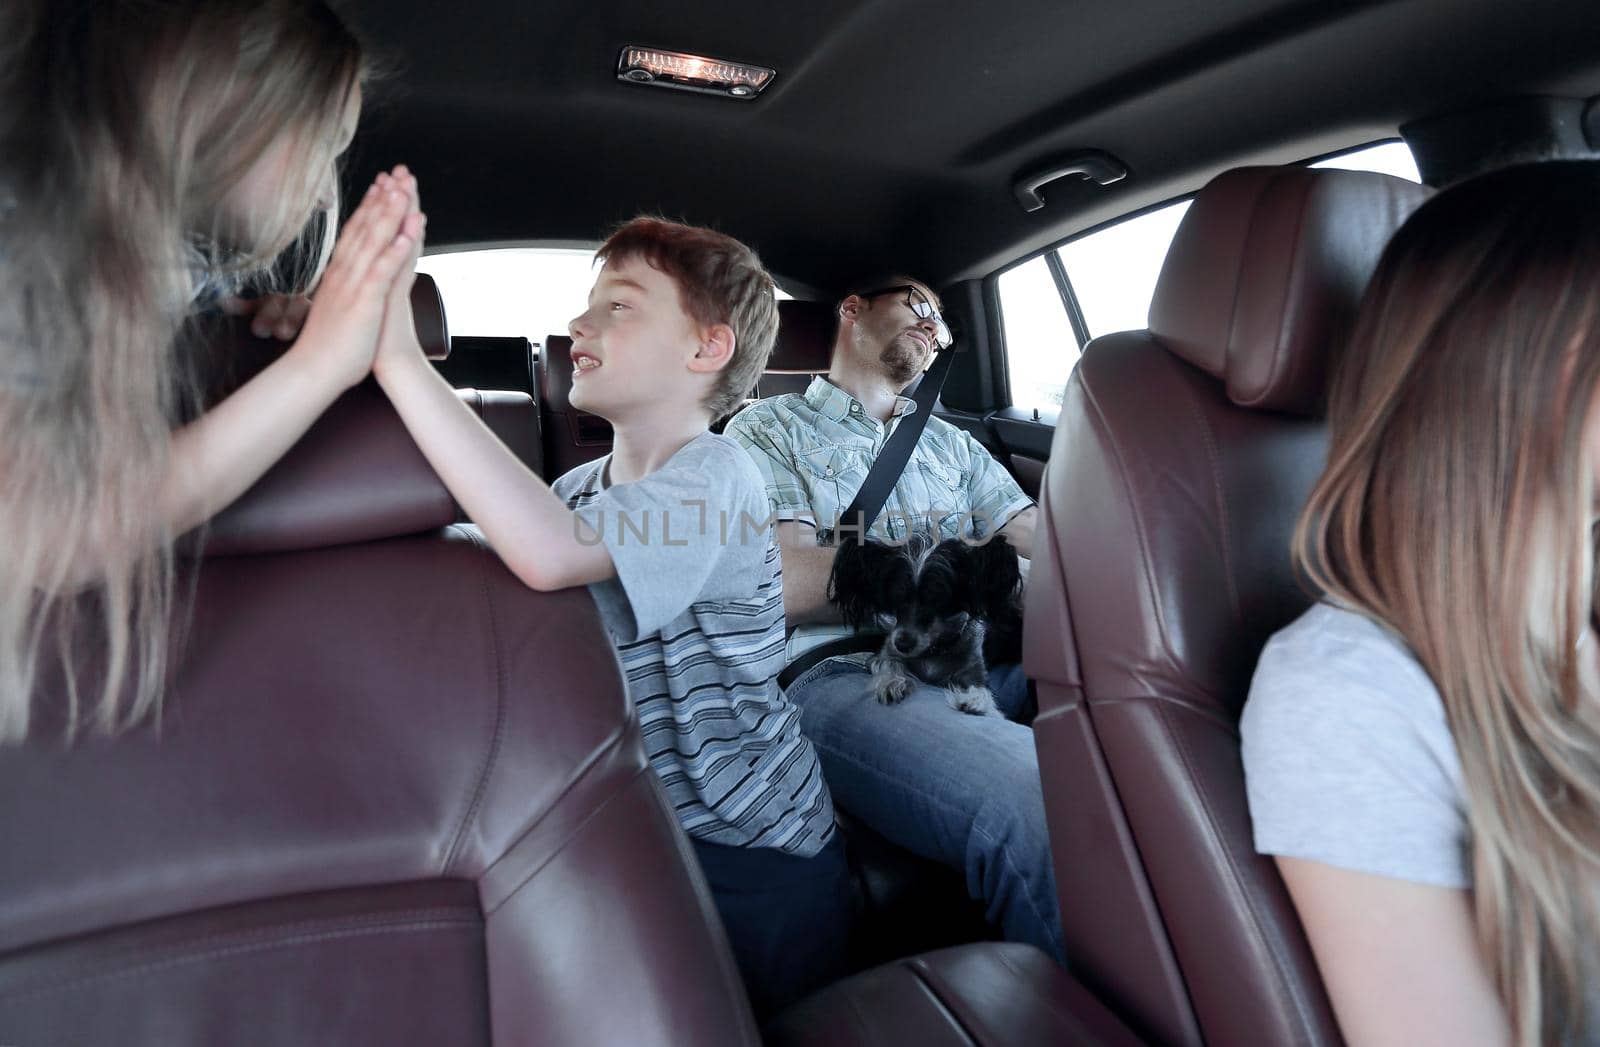 brother and sister give a high five while sitting in the car cabin by asdf